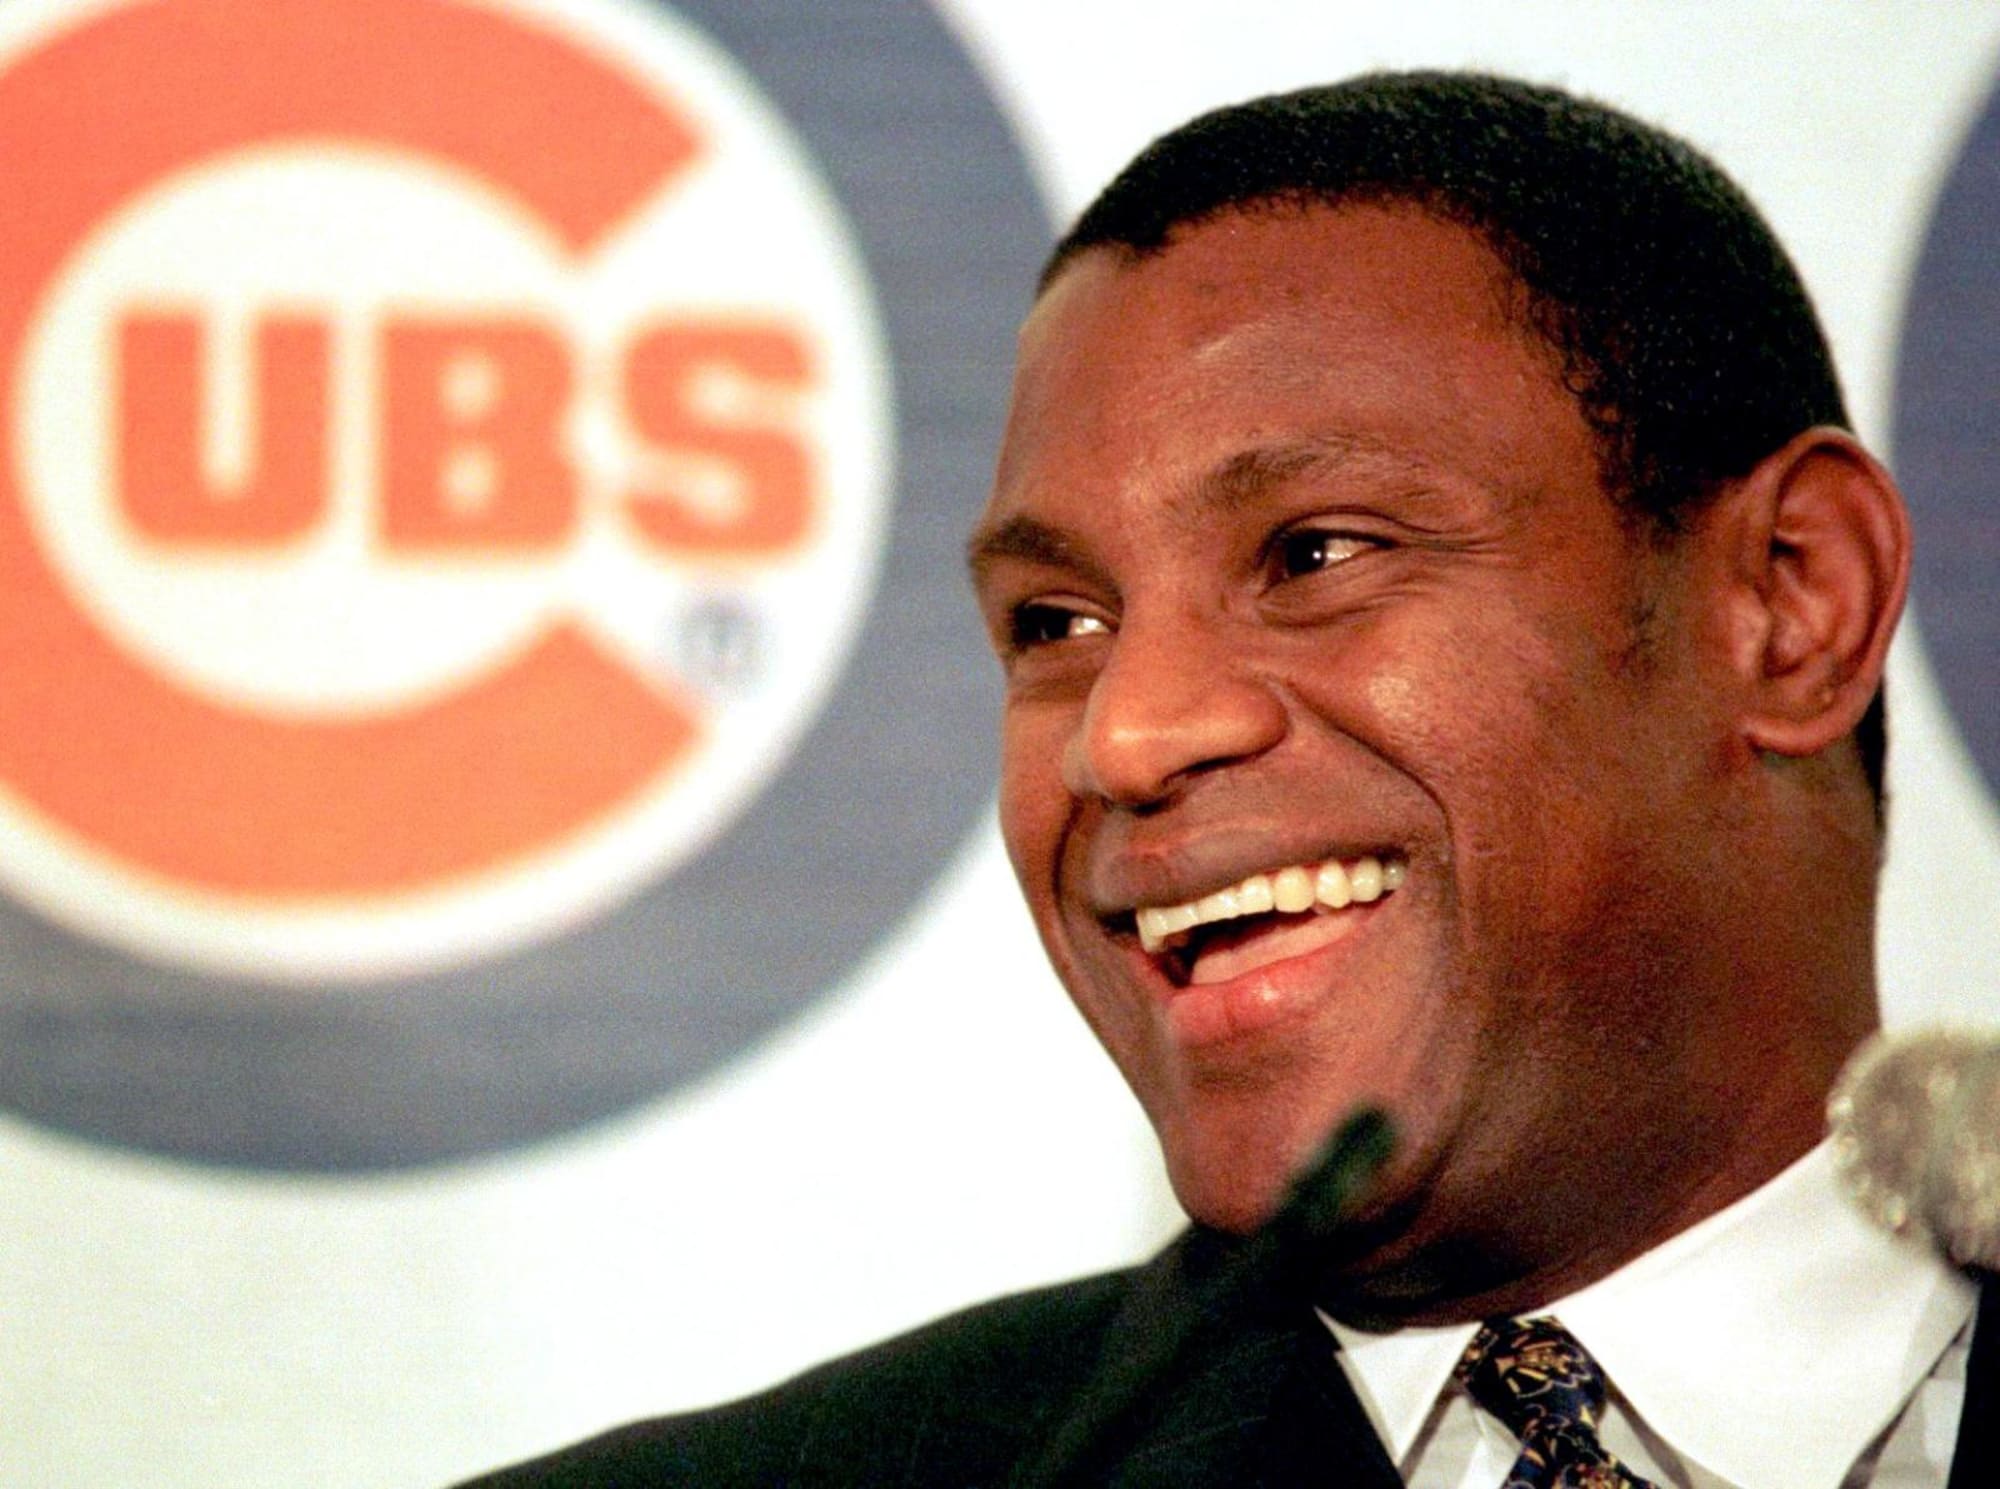 Sammy Sosa is making Chicago Cubs look awful with words